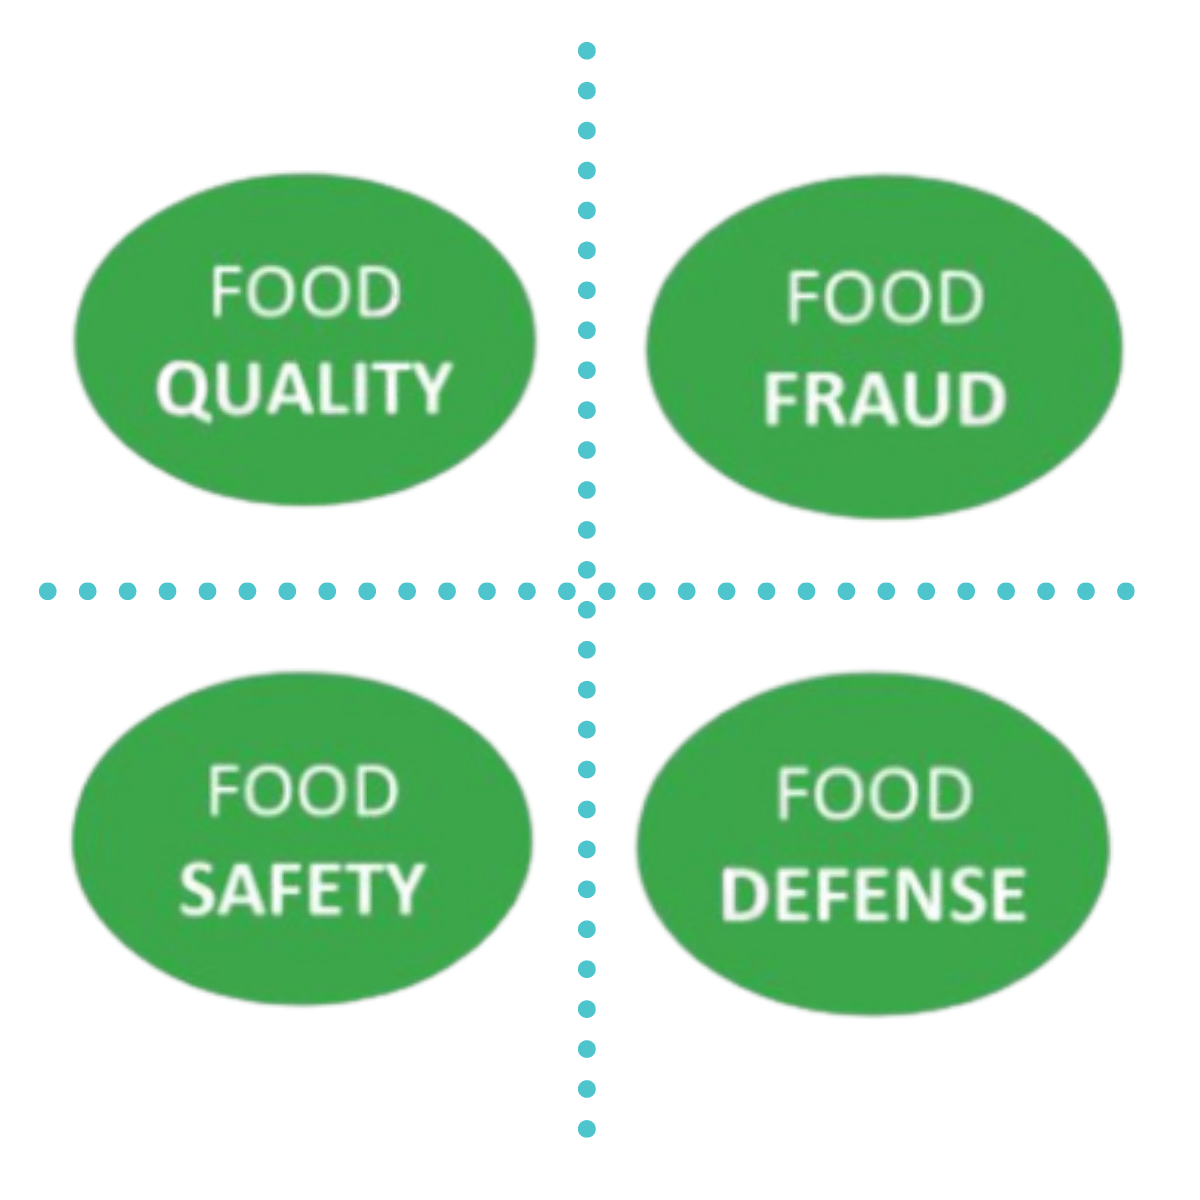 Food Safety Quality Fraus and Defense